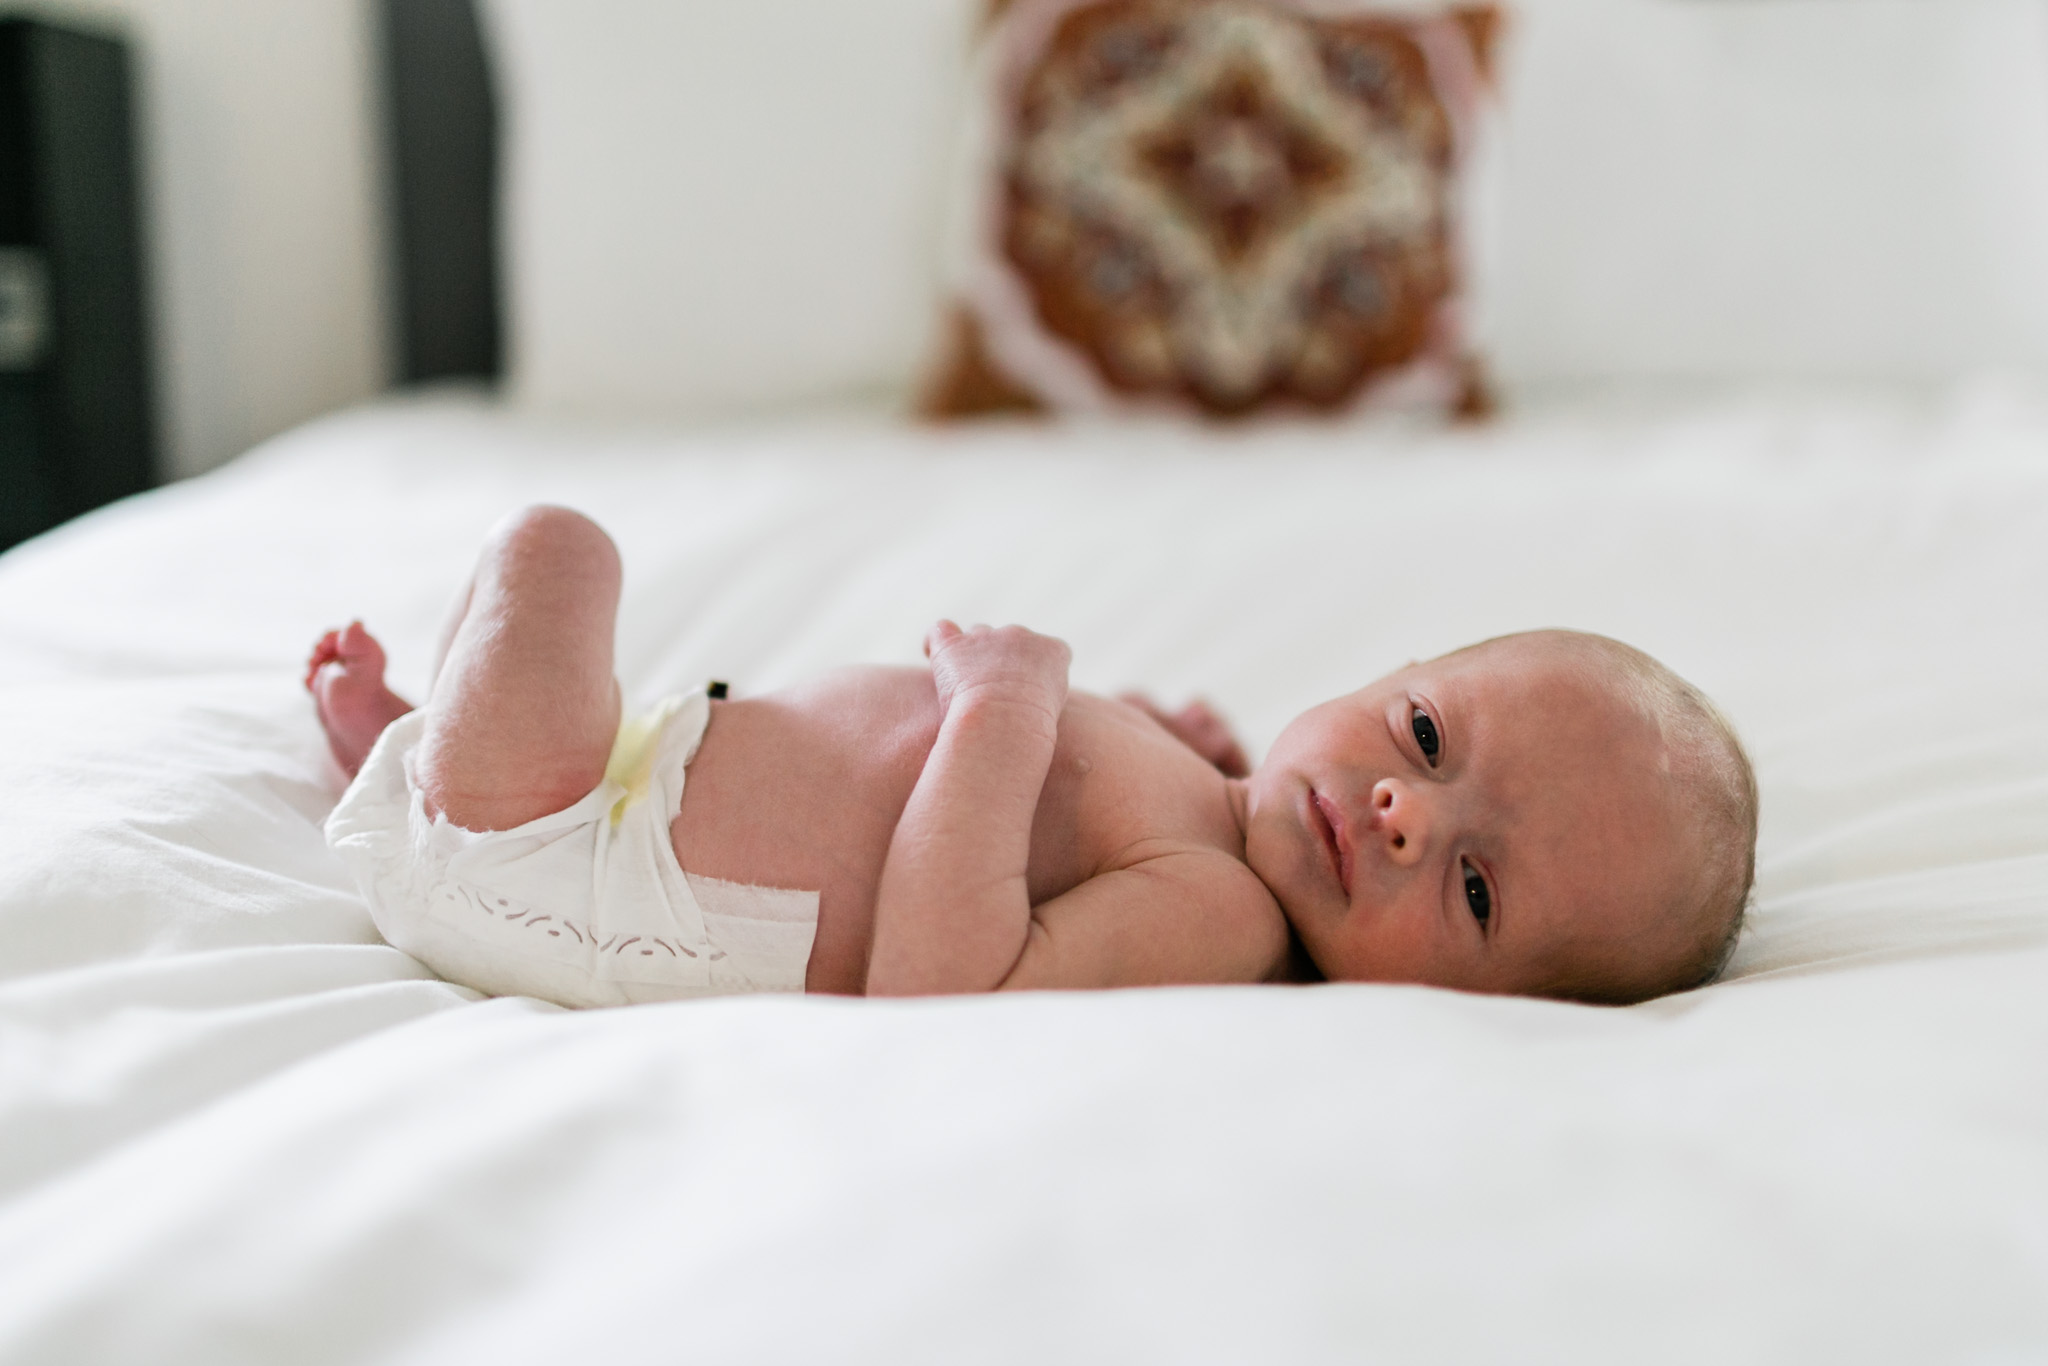 Durham Newborn Photographer | By G. Lin Photography | Organic newborn baby photo on bed with white sheets